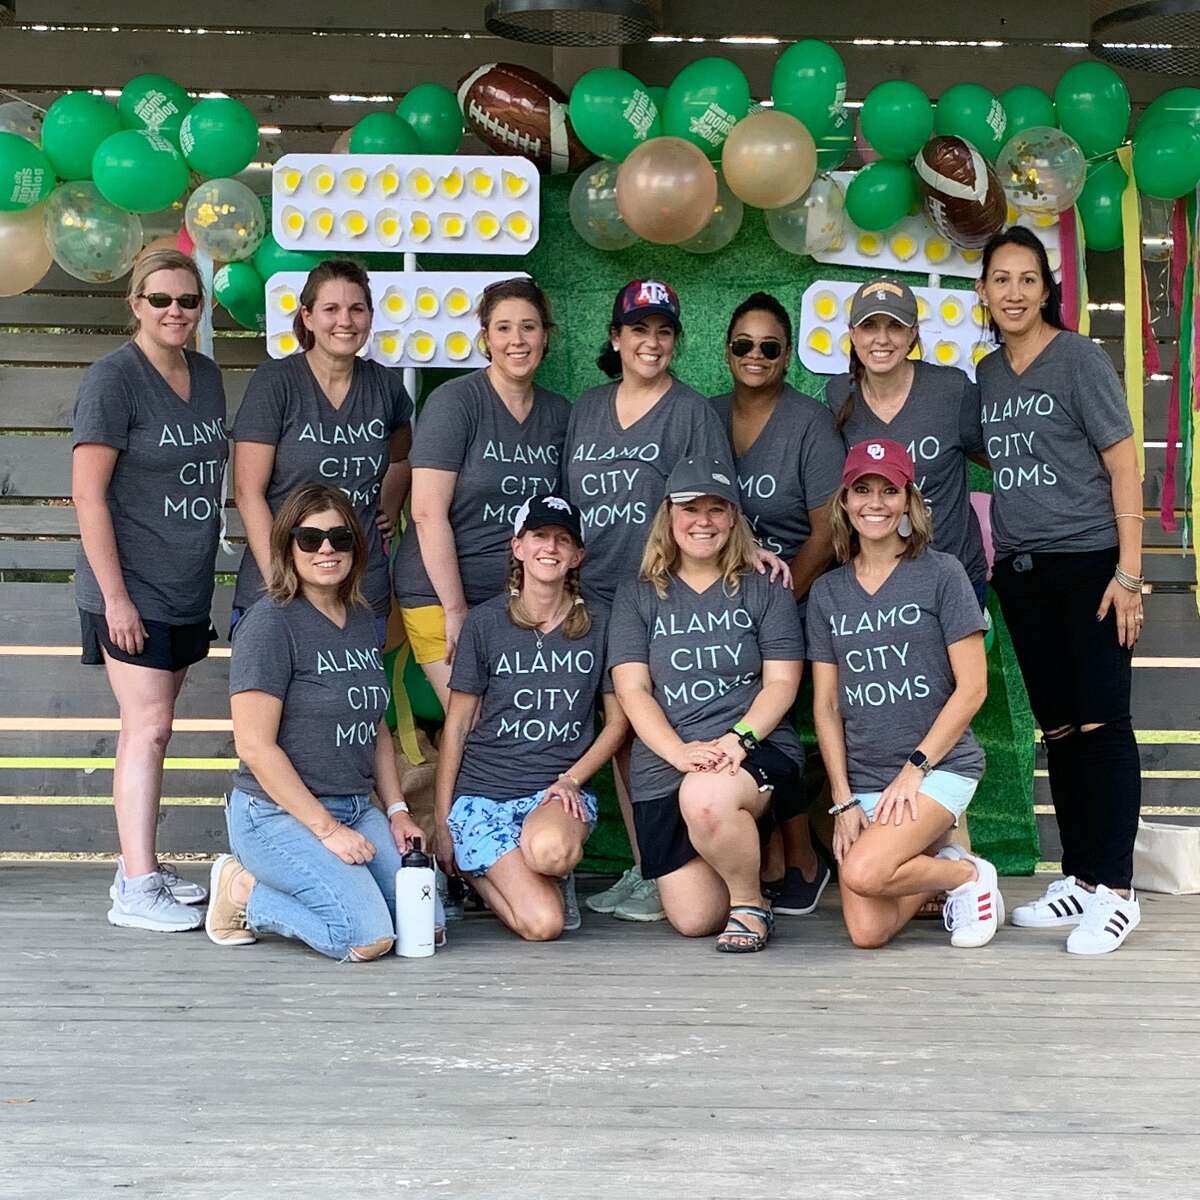 The Alamo City Moms team is seen during a family play-date event in October of 2019.